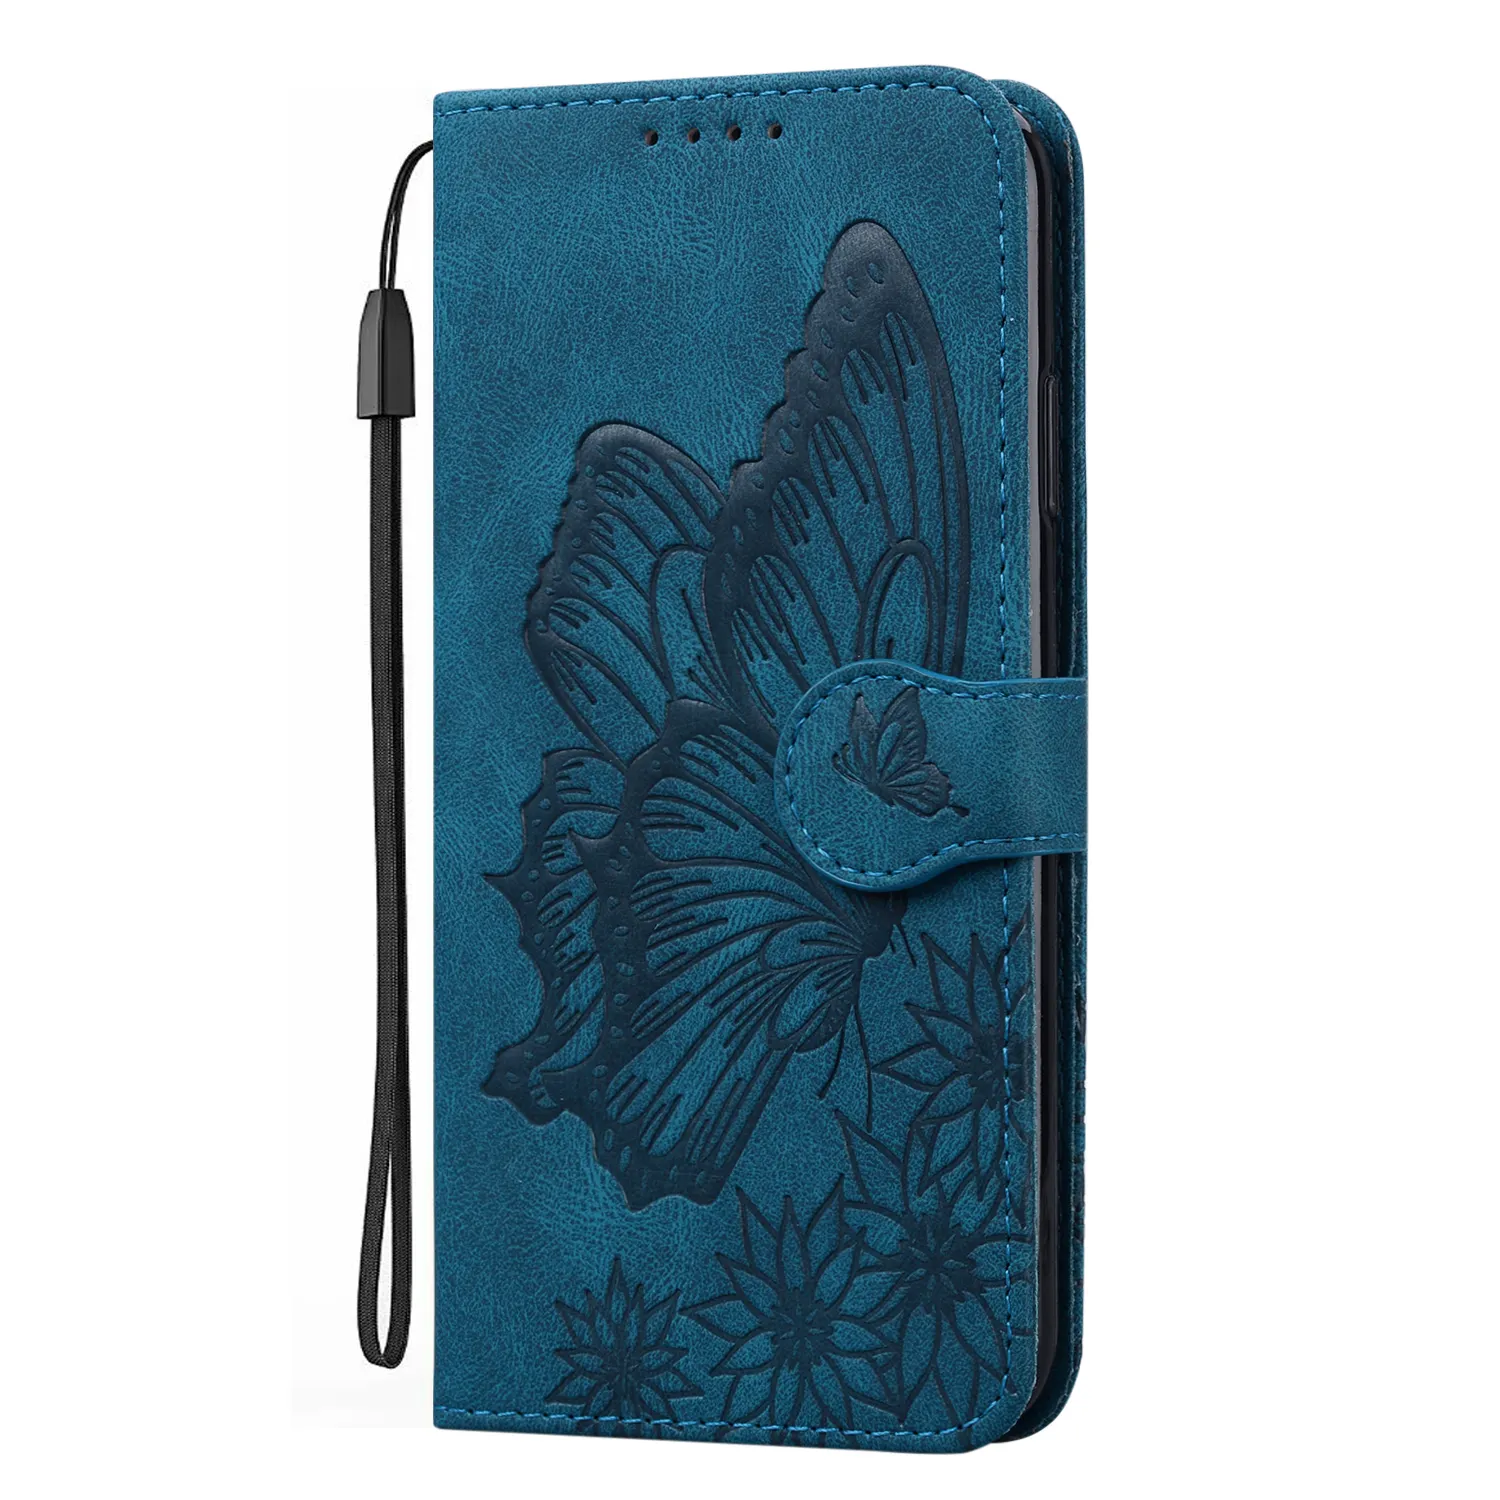 Fashion luxury business butterfly case flip leather card slots mobile phone cover for iphone 12 pro max